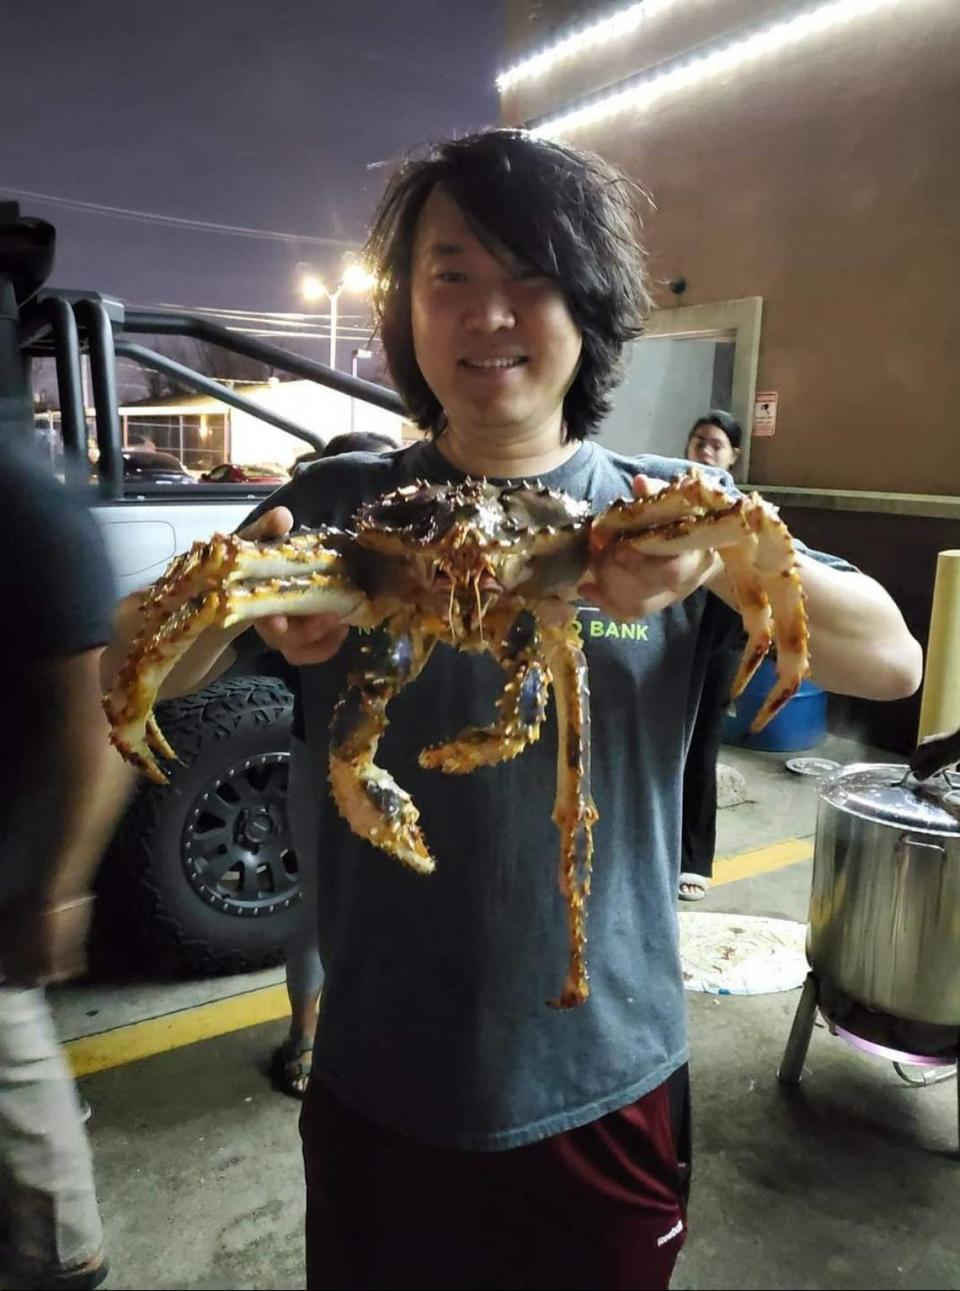 Jin Shin regularly hosted crawfish boils at his business, Family Karaoke, over the summer. Friends said he was enthusiastic about perfecting his recipe and one time even bought a $400 king crab to go in the boil. He made sure everybody there got a piece.